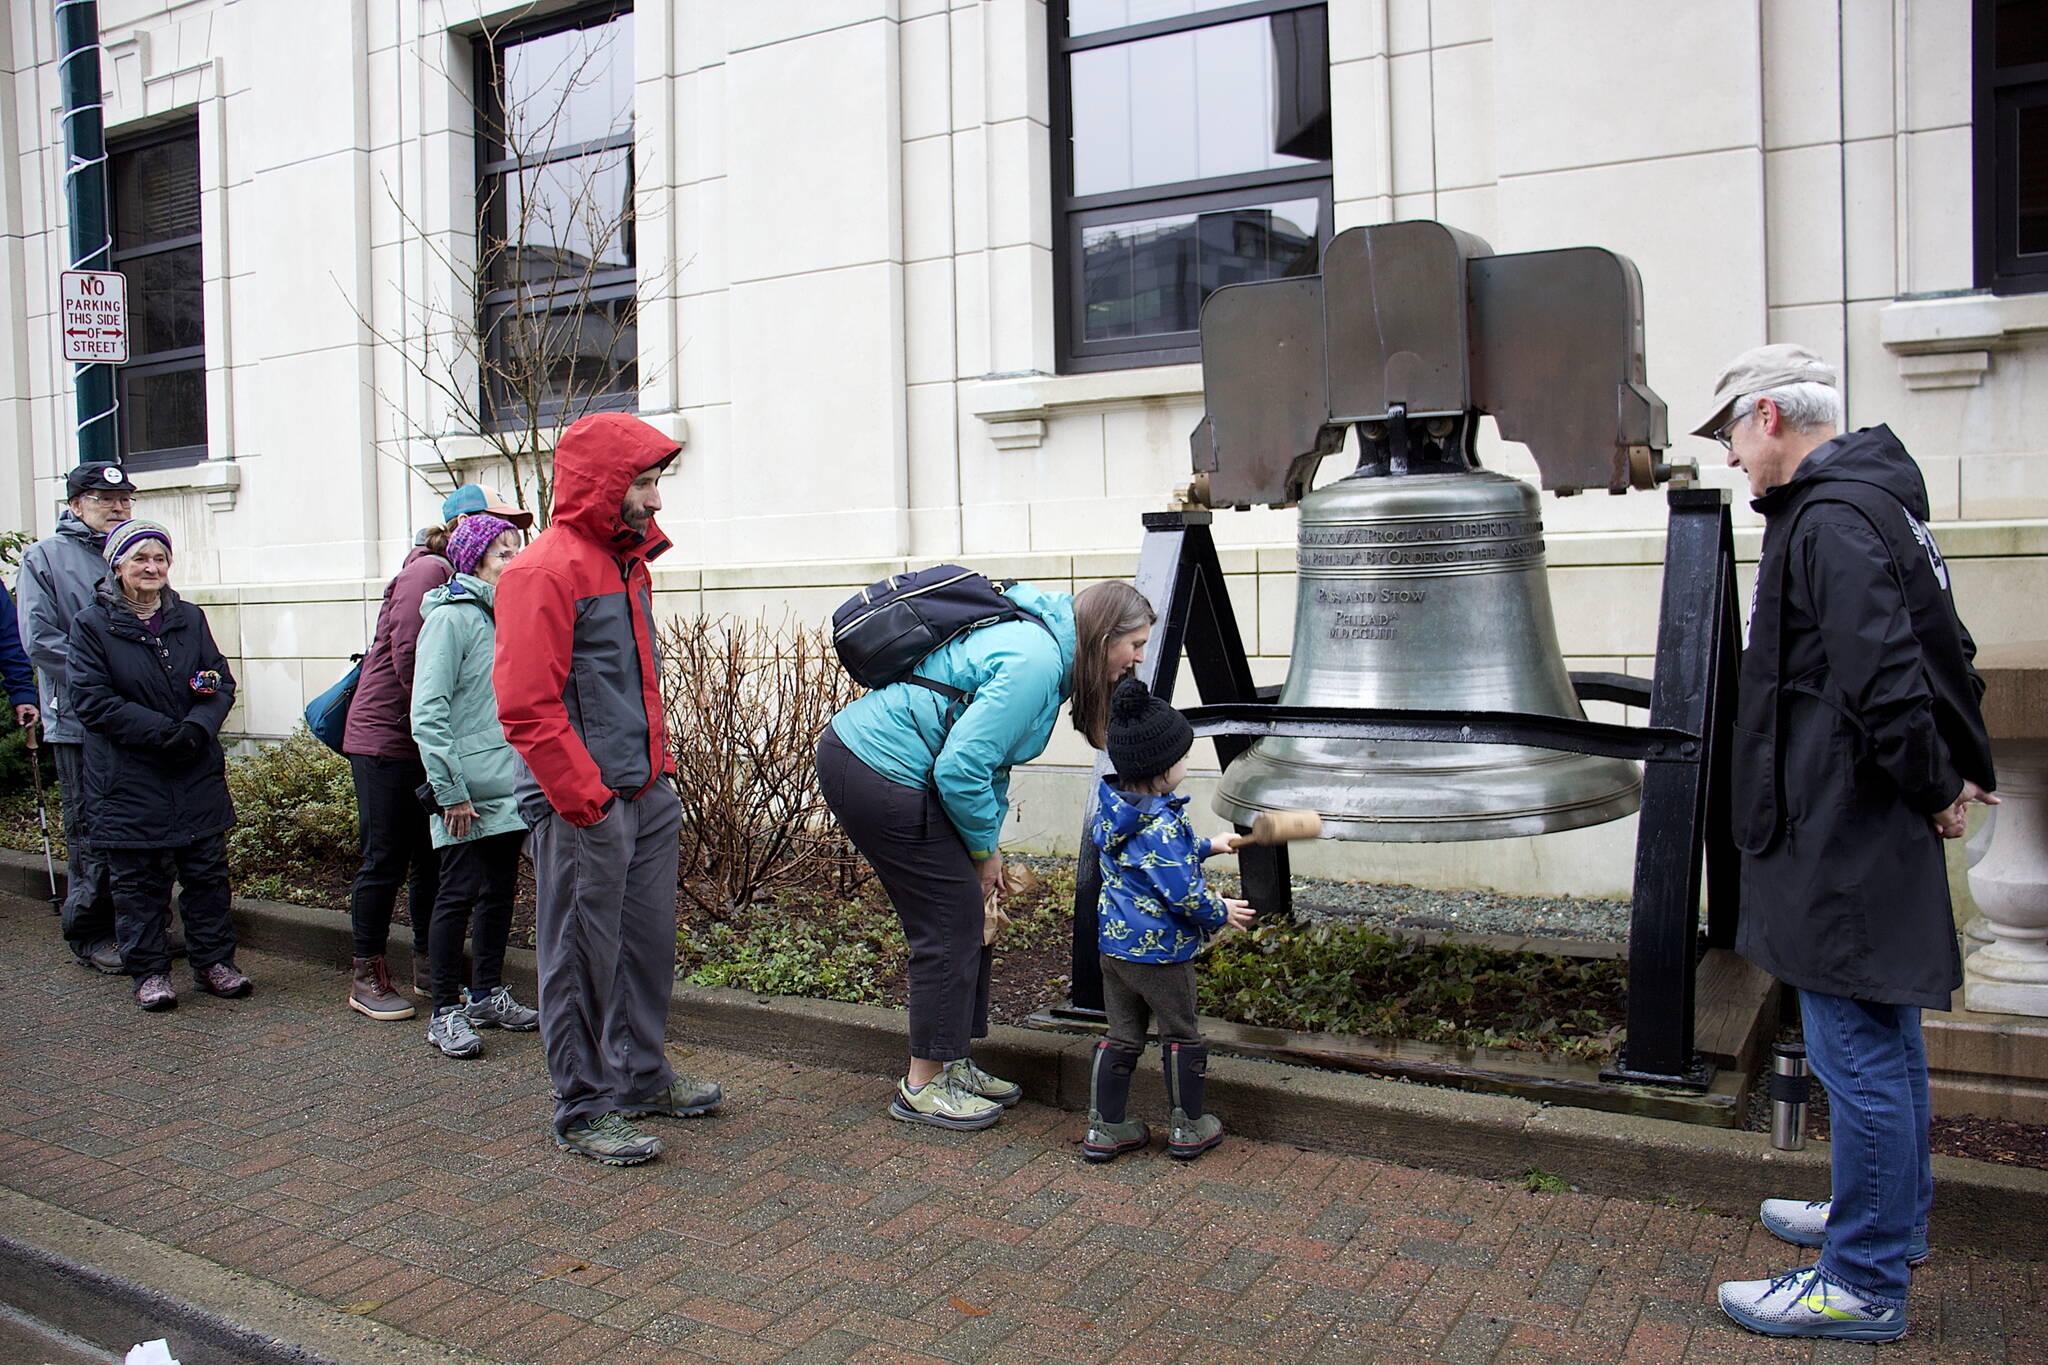 People line up to ring the Liberty Bell replica in front of the Alaska State Capitol at 11 a.m. Saturday during an Armistice Day observation hosted by Juneau Veterans for Peace. (Mark Sabbatini / Juneau Empire)